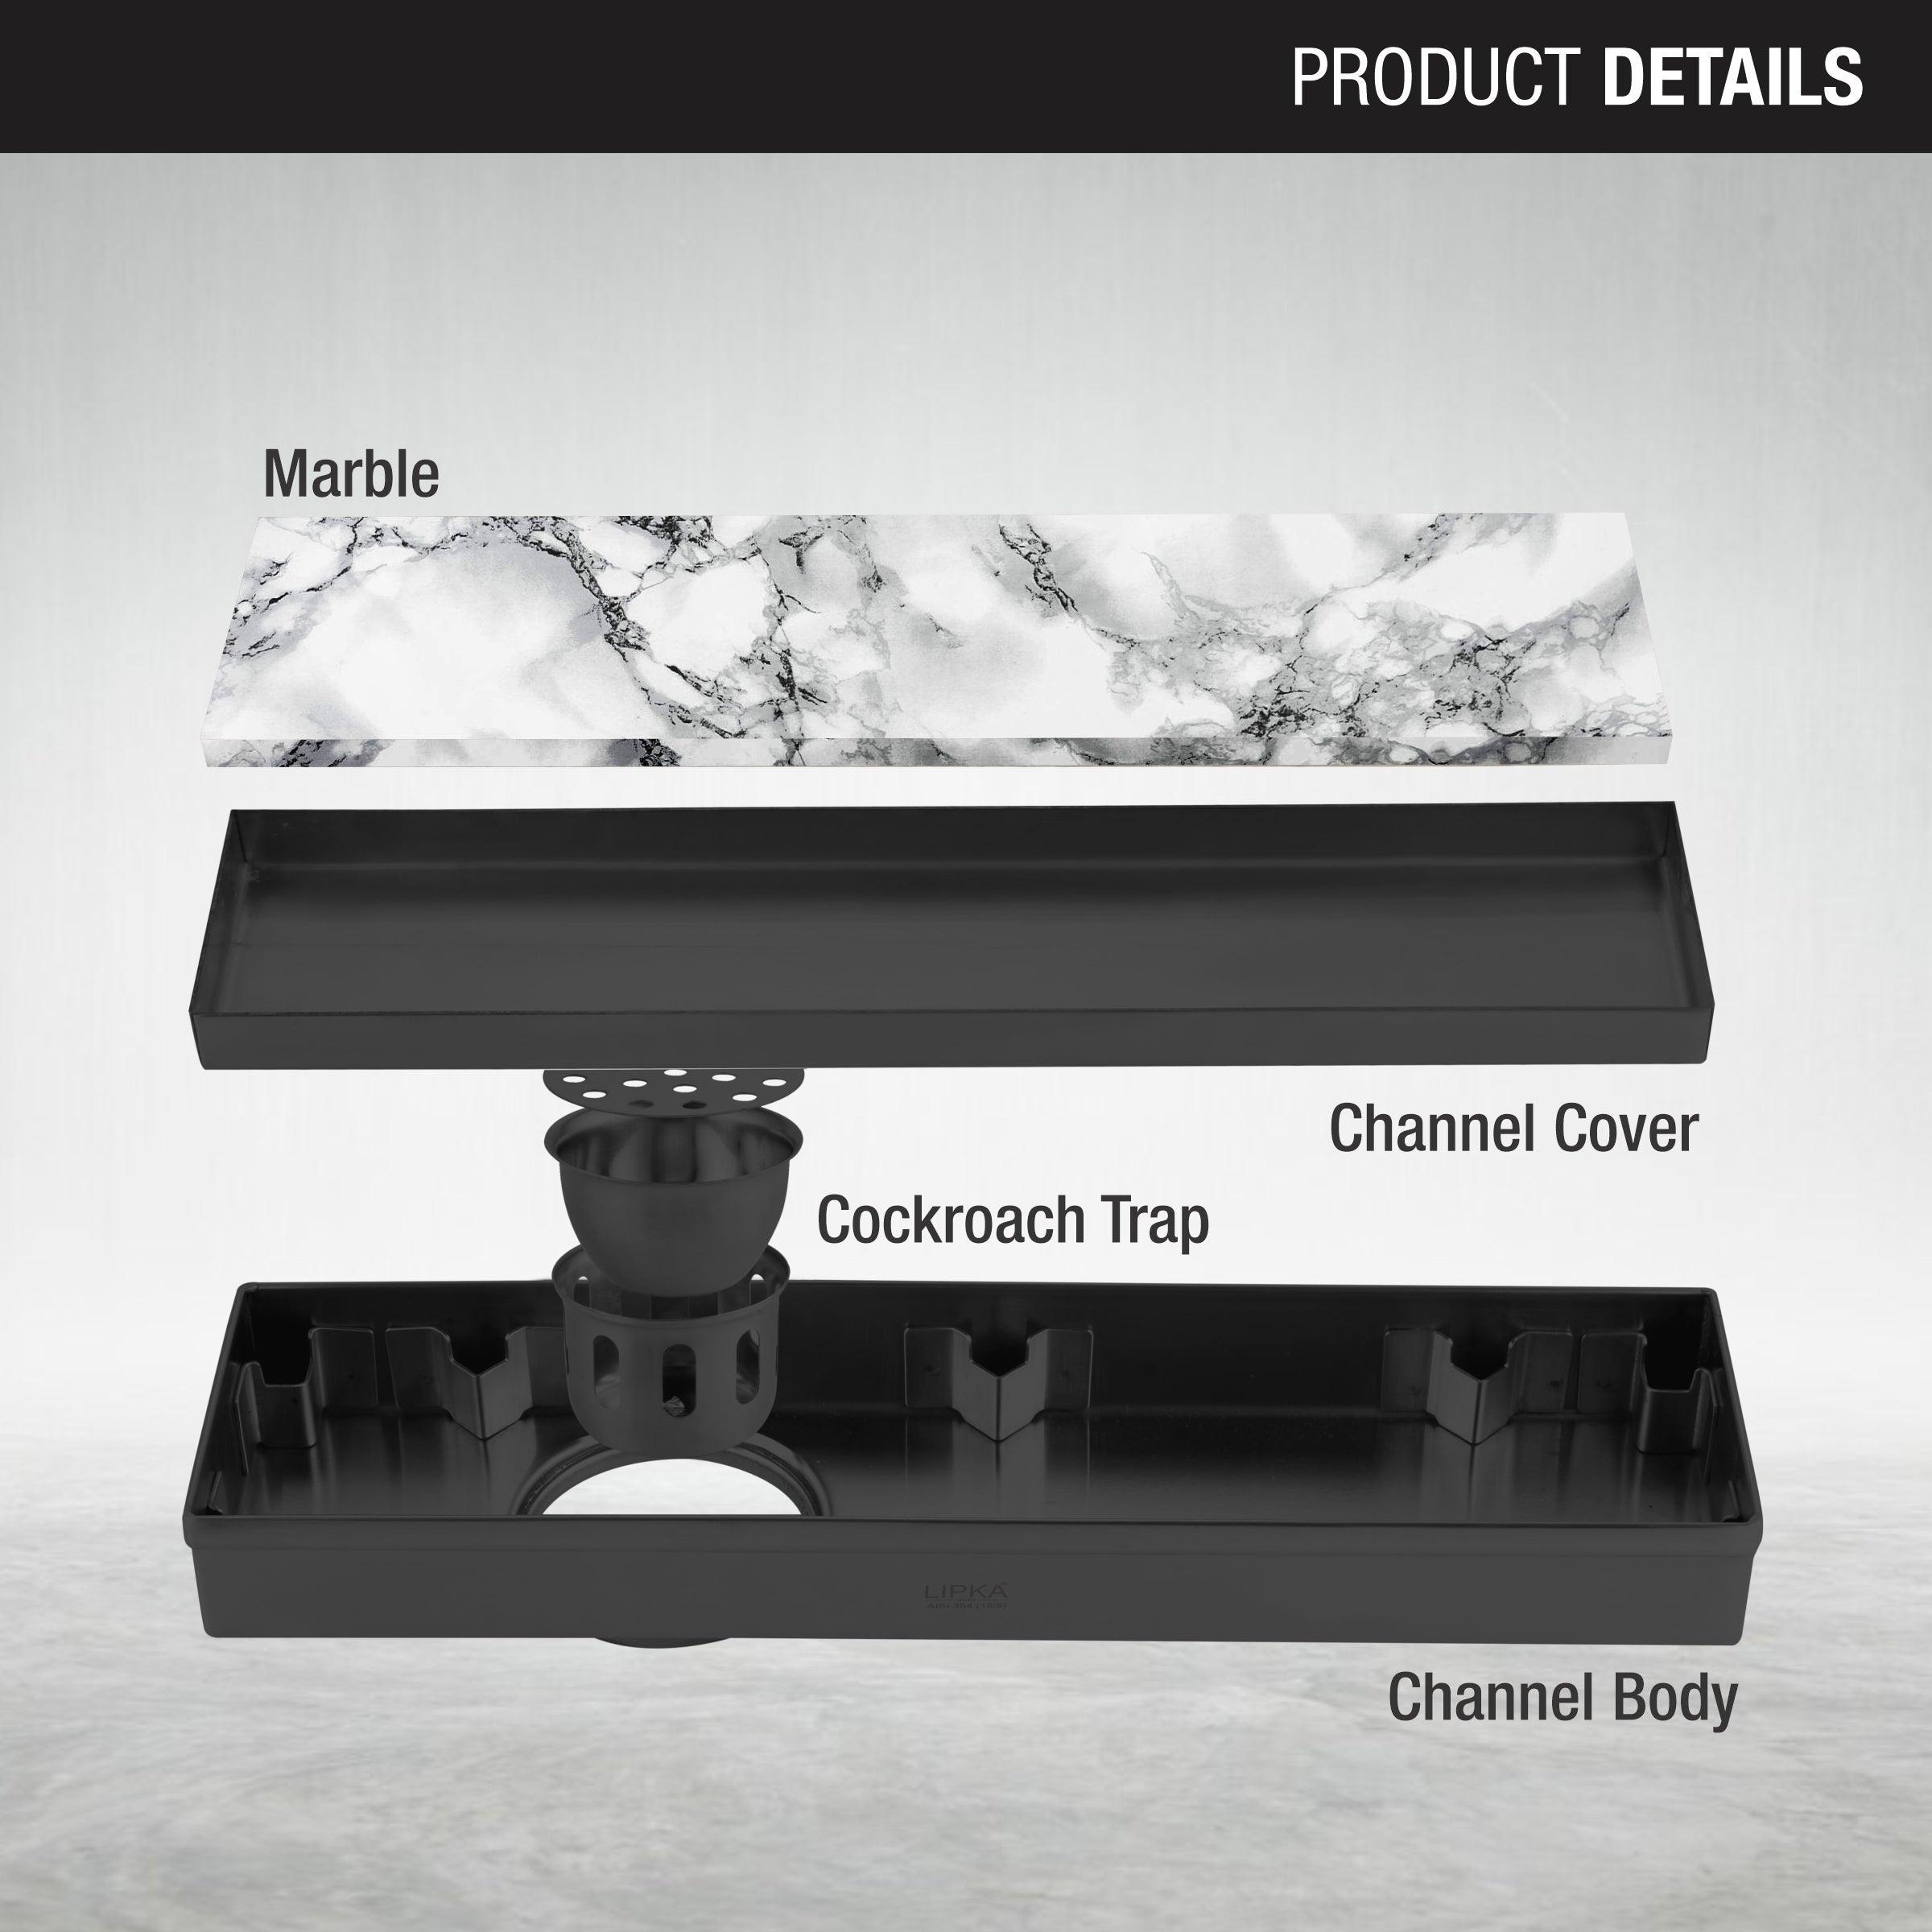 Marble Insert Shower Drain Channel - Black (32 x 3 Inches) parts